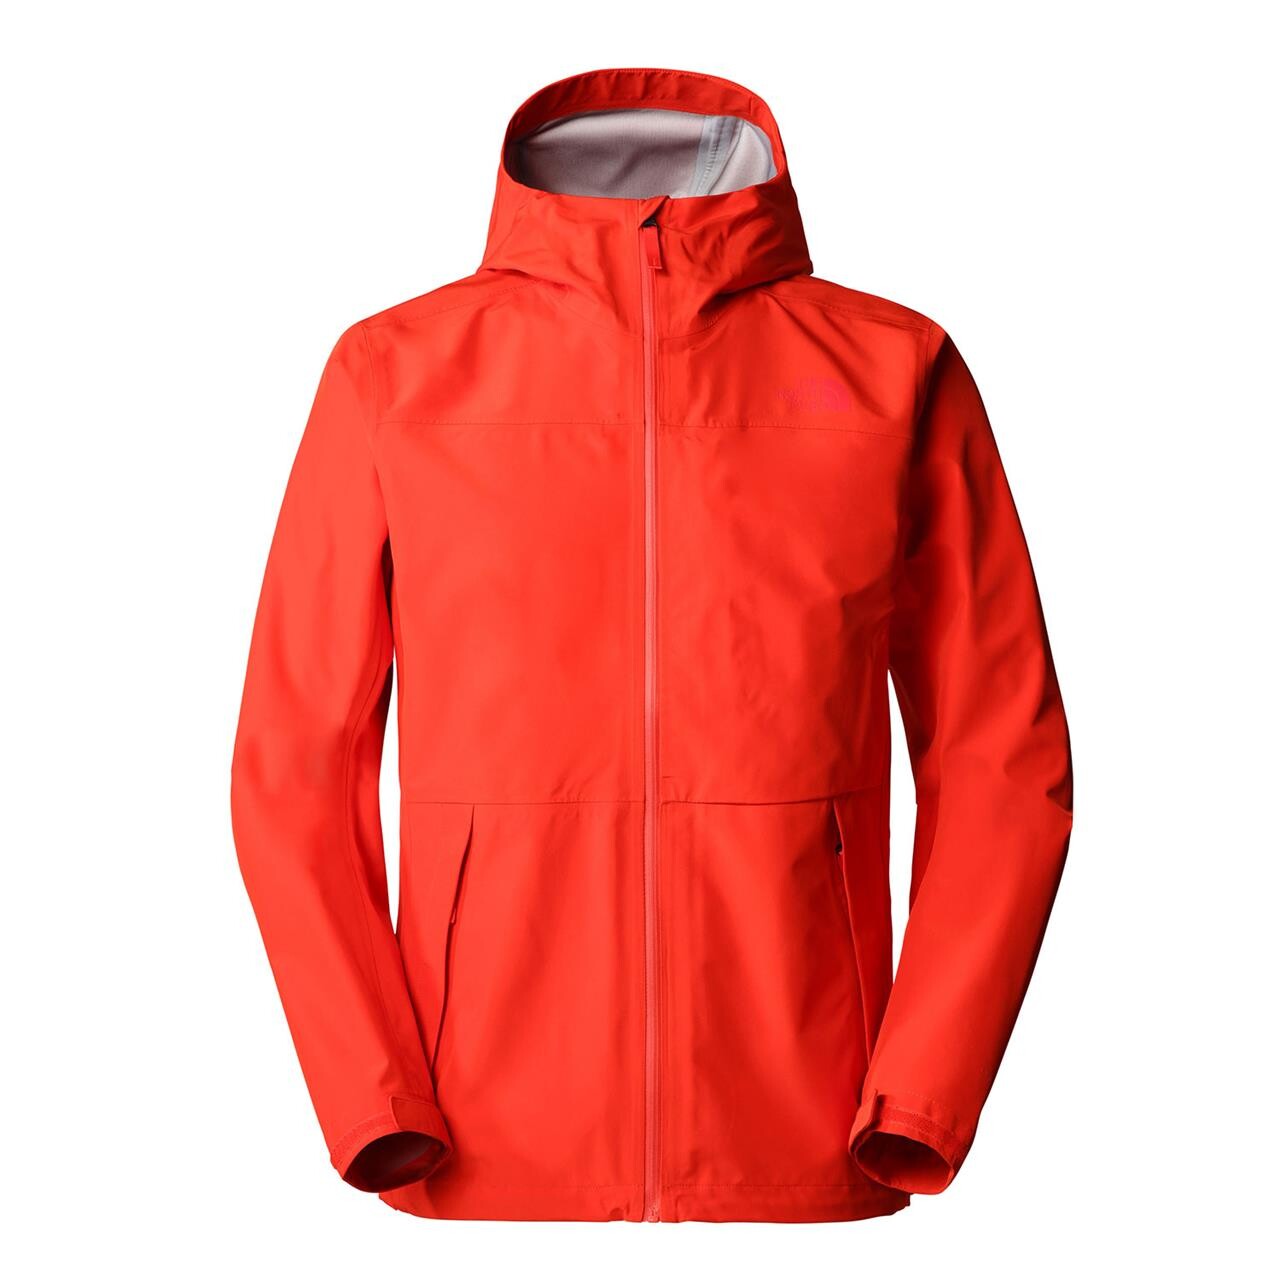 Billede af The North Face Mens Dryzzle Futurelight Jacket (Rød (FIERY RED) Small)